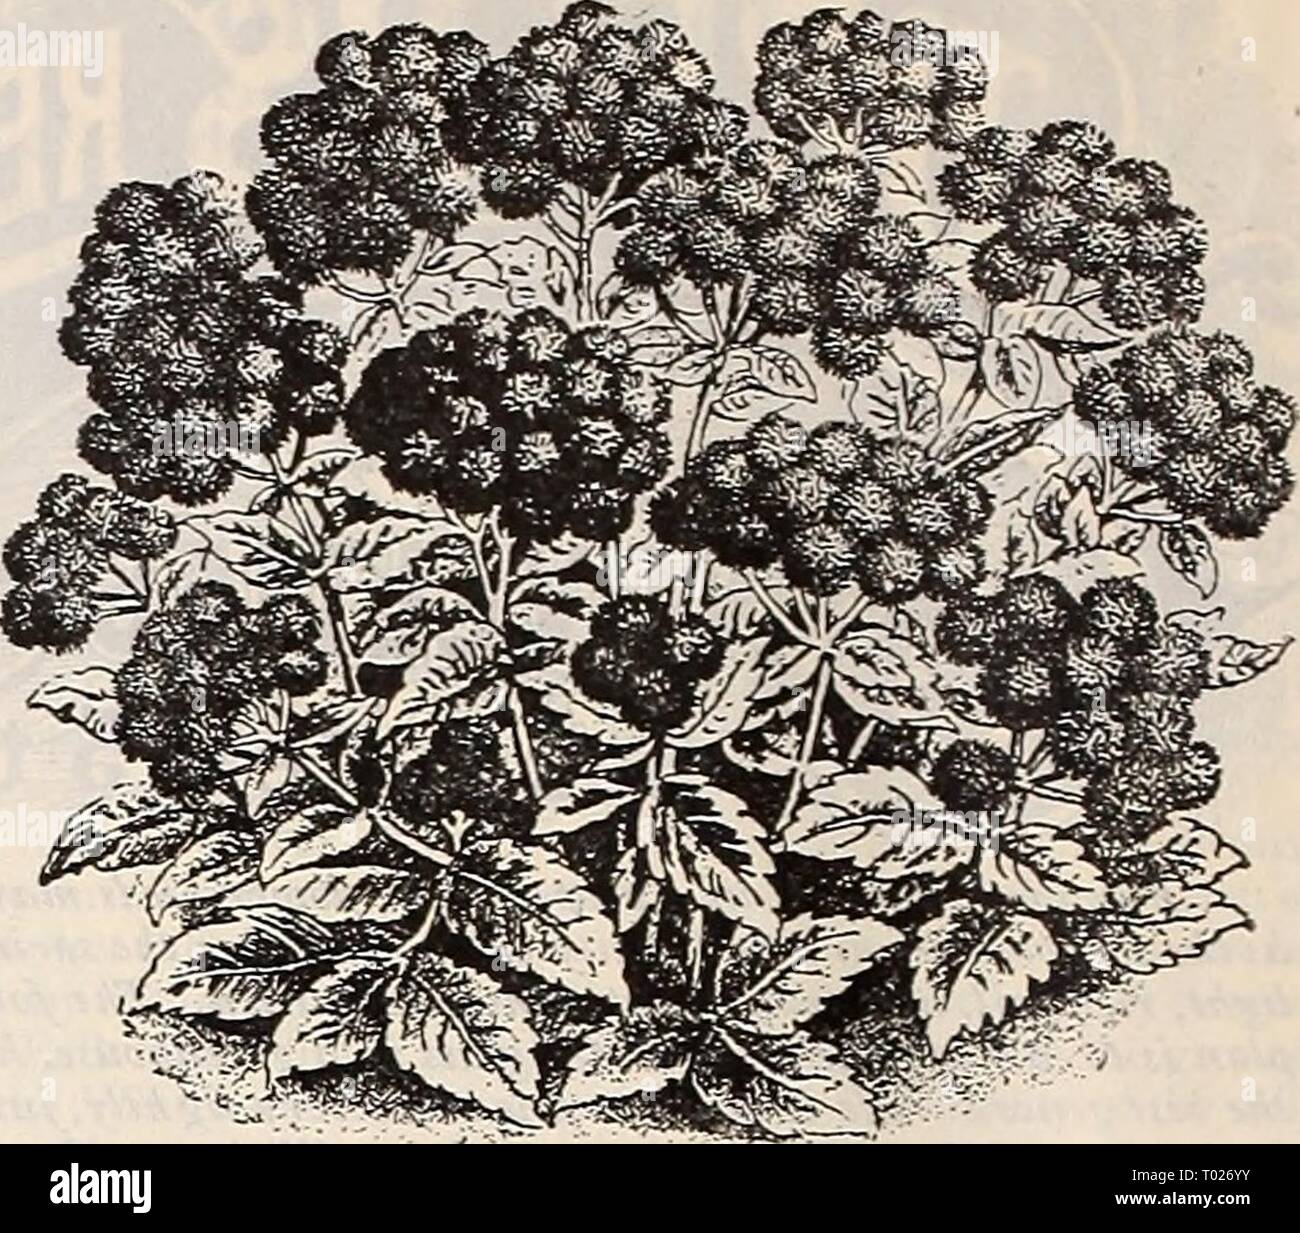 Dreer's garden calendar : 1899 . dreersgardencale1899henr Year: 1899  56 DREER'S RELIABLE FLOWER SEEDS. AGERATUM. One of the leading plants for beds or borders, and very useful where cut flowers are in demand ; in bloom the whole Summer ; also good for Winter blooming ; annuals. PER PKT. 5047 Blue Perfection. This is the darkest colored of all large flowering Ageratums. Color deep amethyst-blue ; compact growth. (See cut.) 15 5046 Cope's Pet. Lovely azure-blue ; 6 inches; this is consid- ered the best variety for edging 10 5041 Mexicanum. Lavender blue ; y2 feet 5 5042 Imperial Dwarf Blue ; 8 Stock Photo